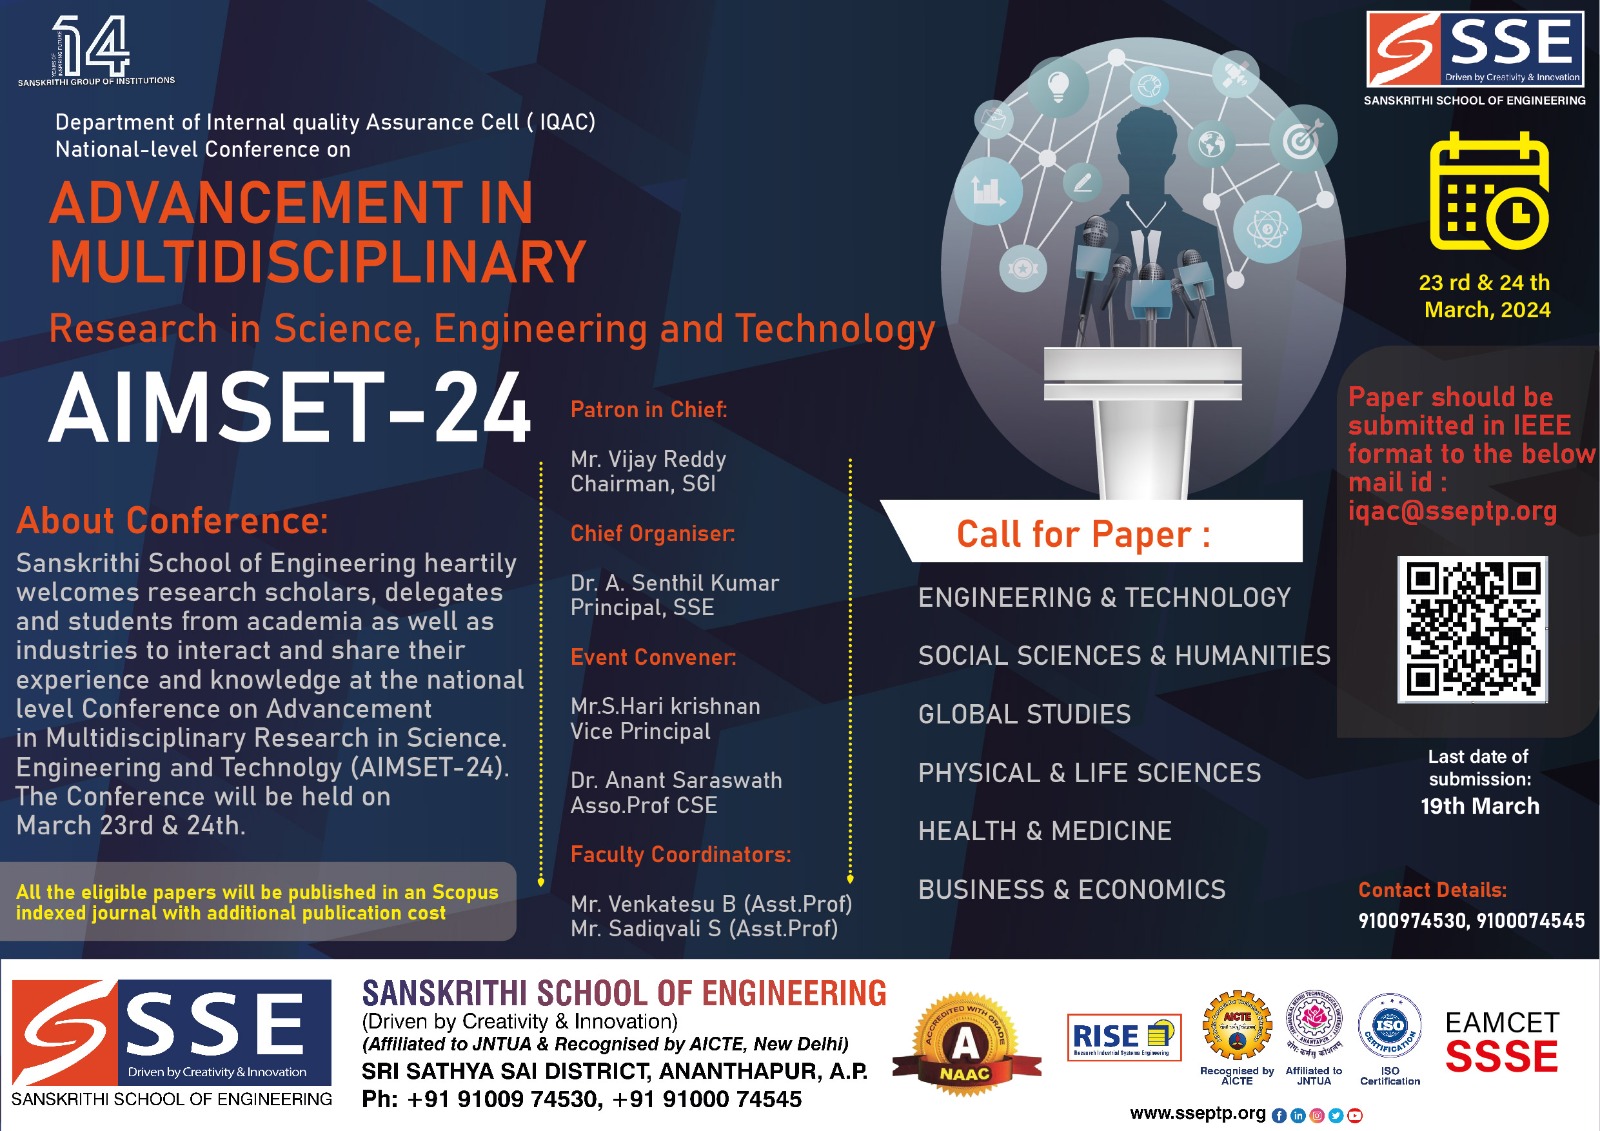 National Conference on Advancement in Multidisciplinary Research in Science, Engineering and Technology 2024